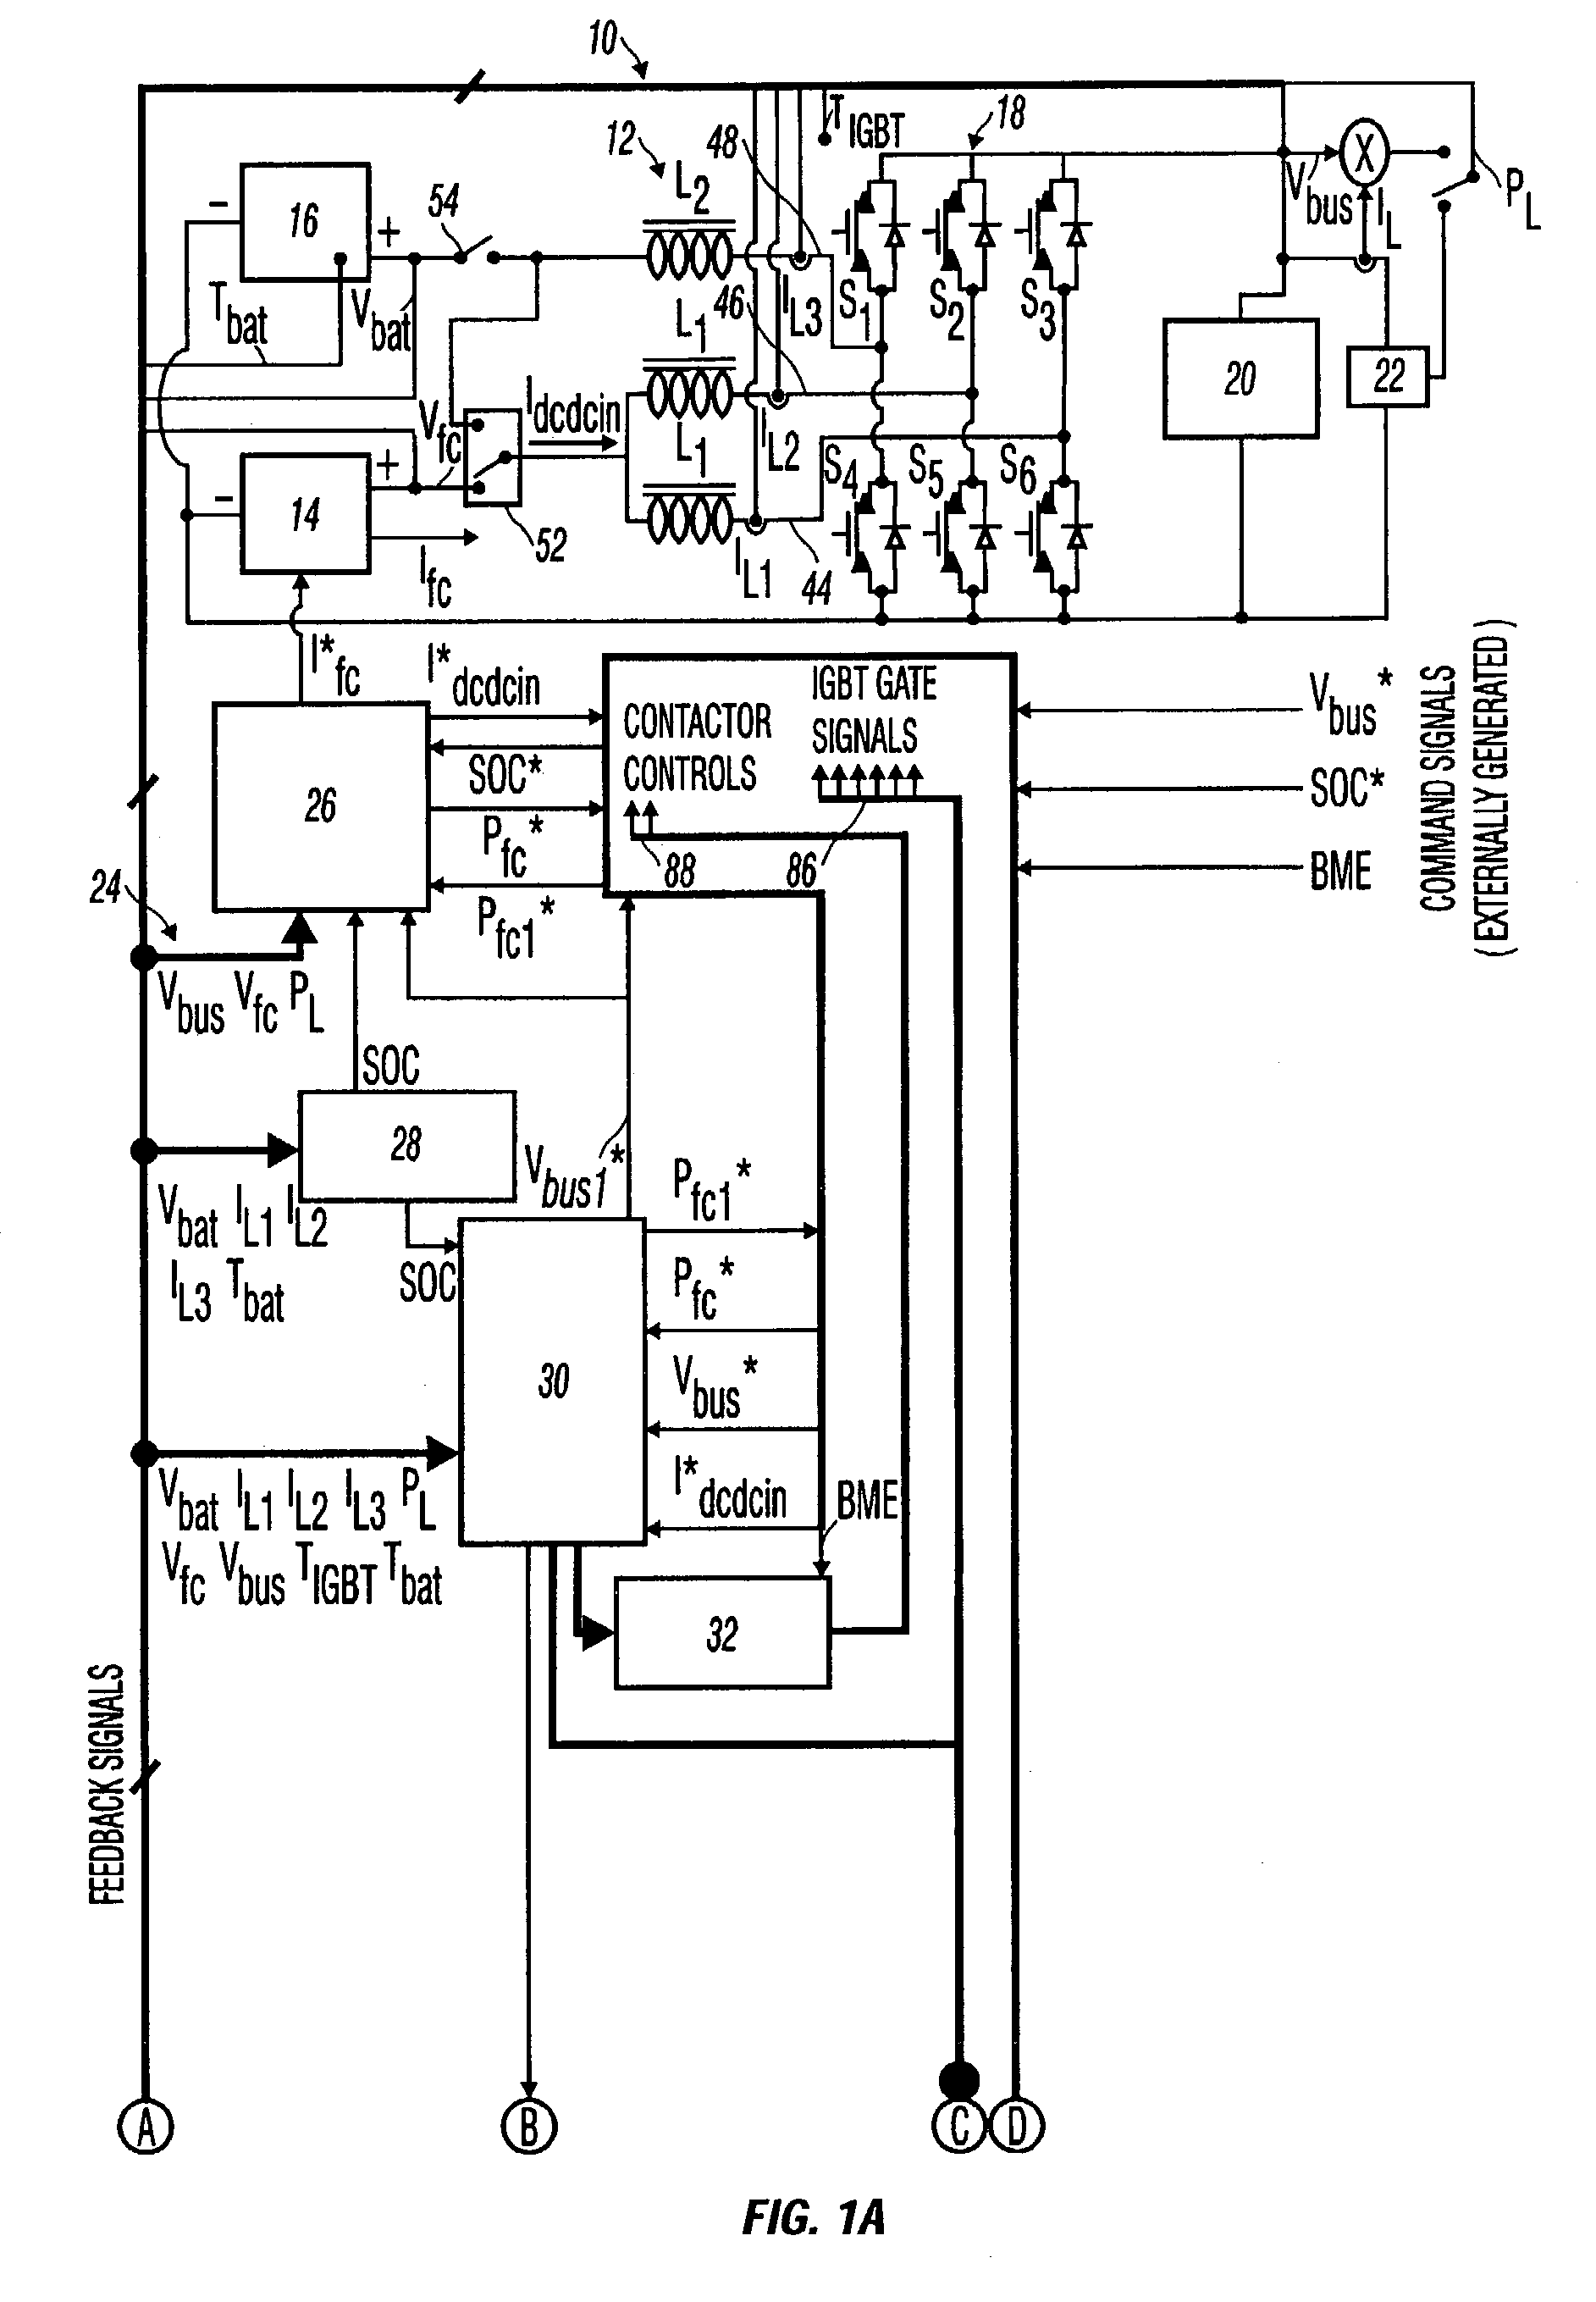 Direct current/direct current converter for a fuel cell system